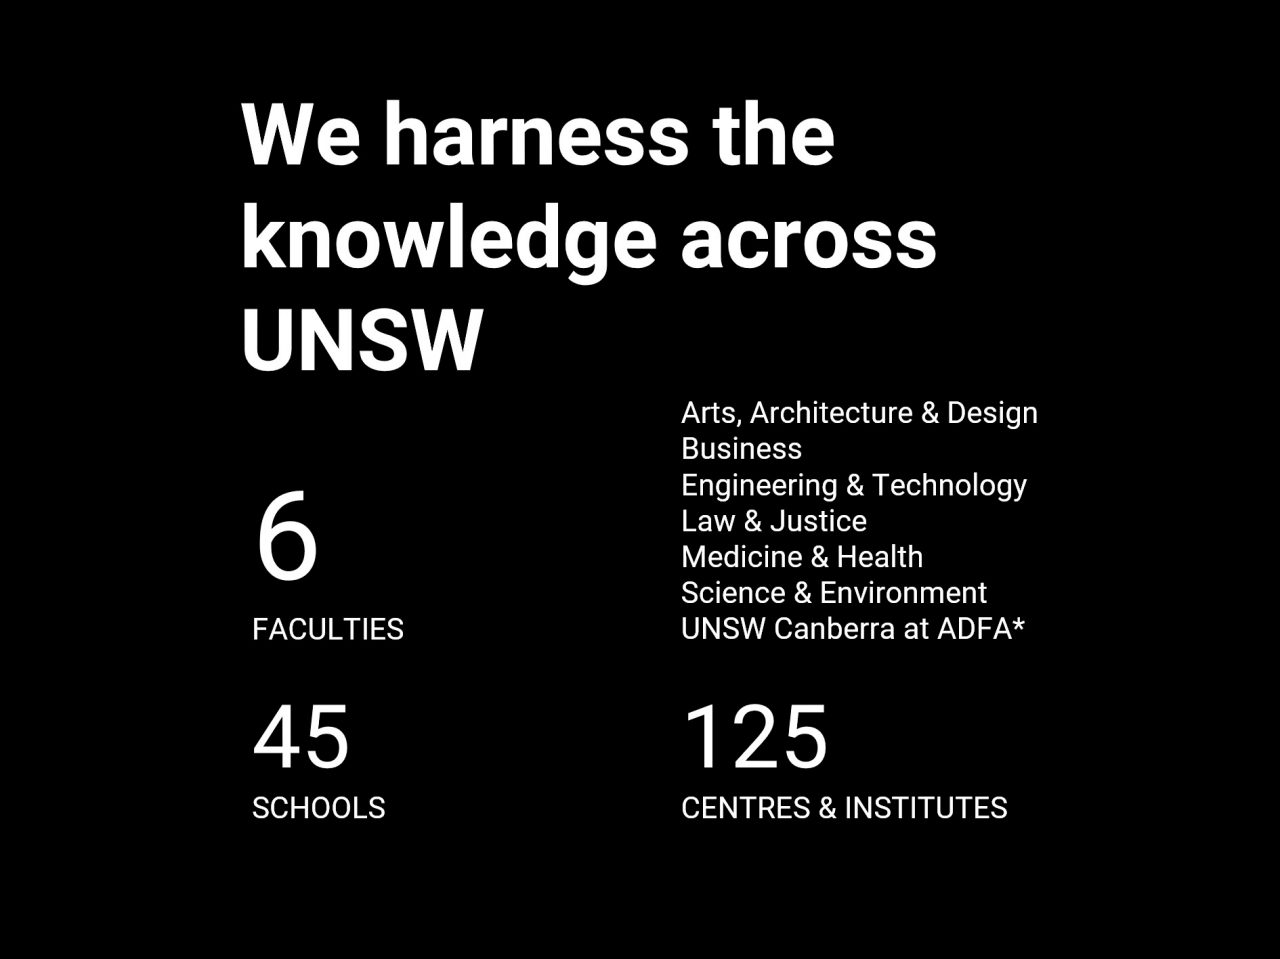 Our UNSW Centres, Institutes and Faculties graphic